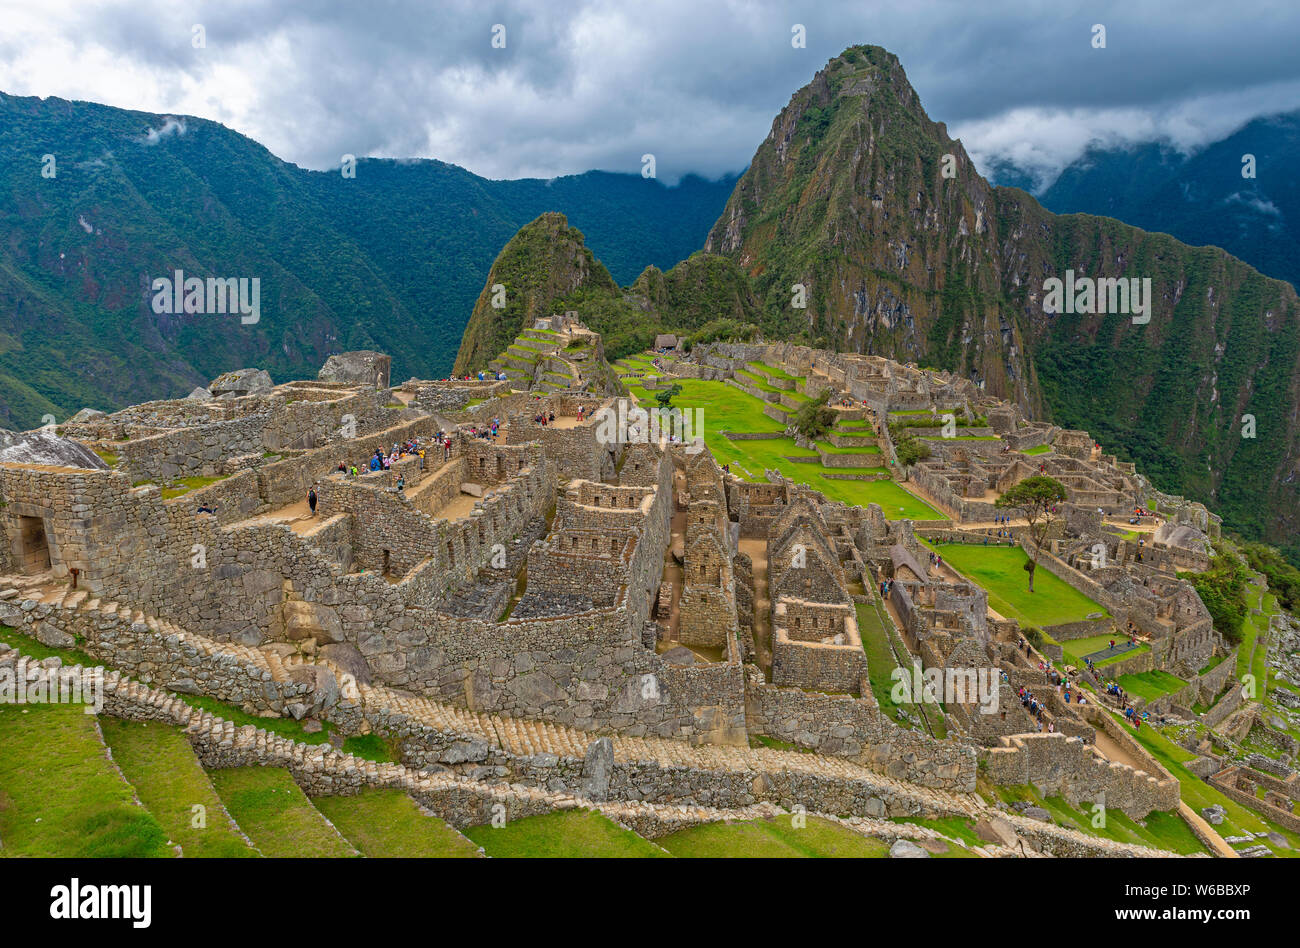 Landscape of the Inca ruin Machu Picchu at the early stages of the rainy season, Cusco province, Peru. Stock Photo